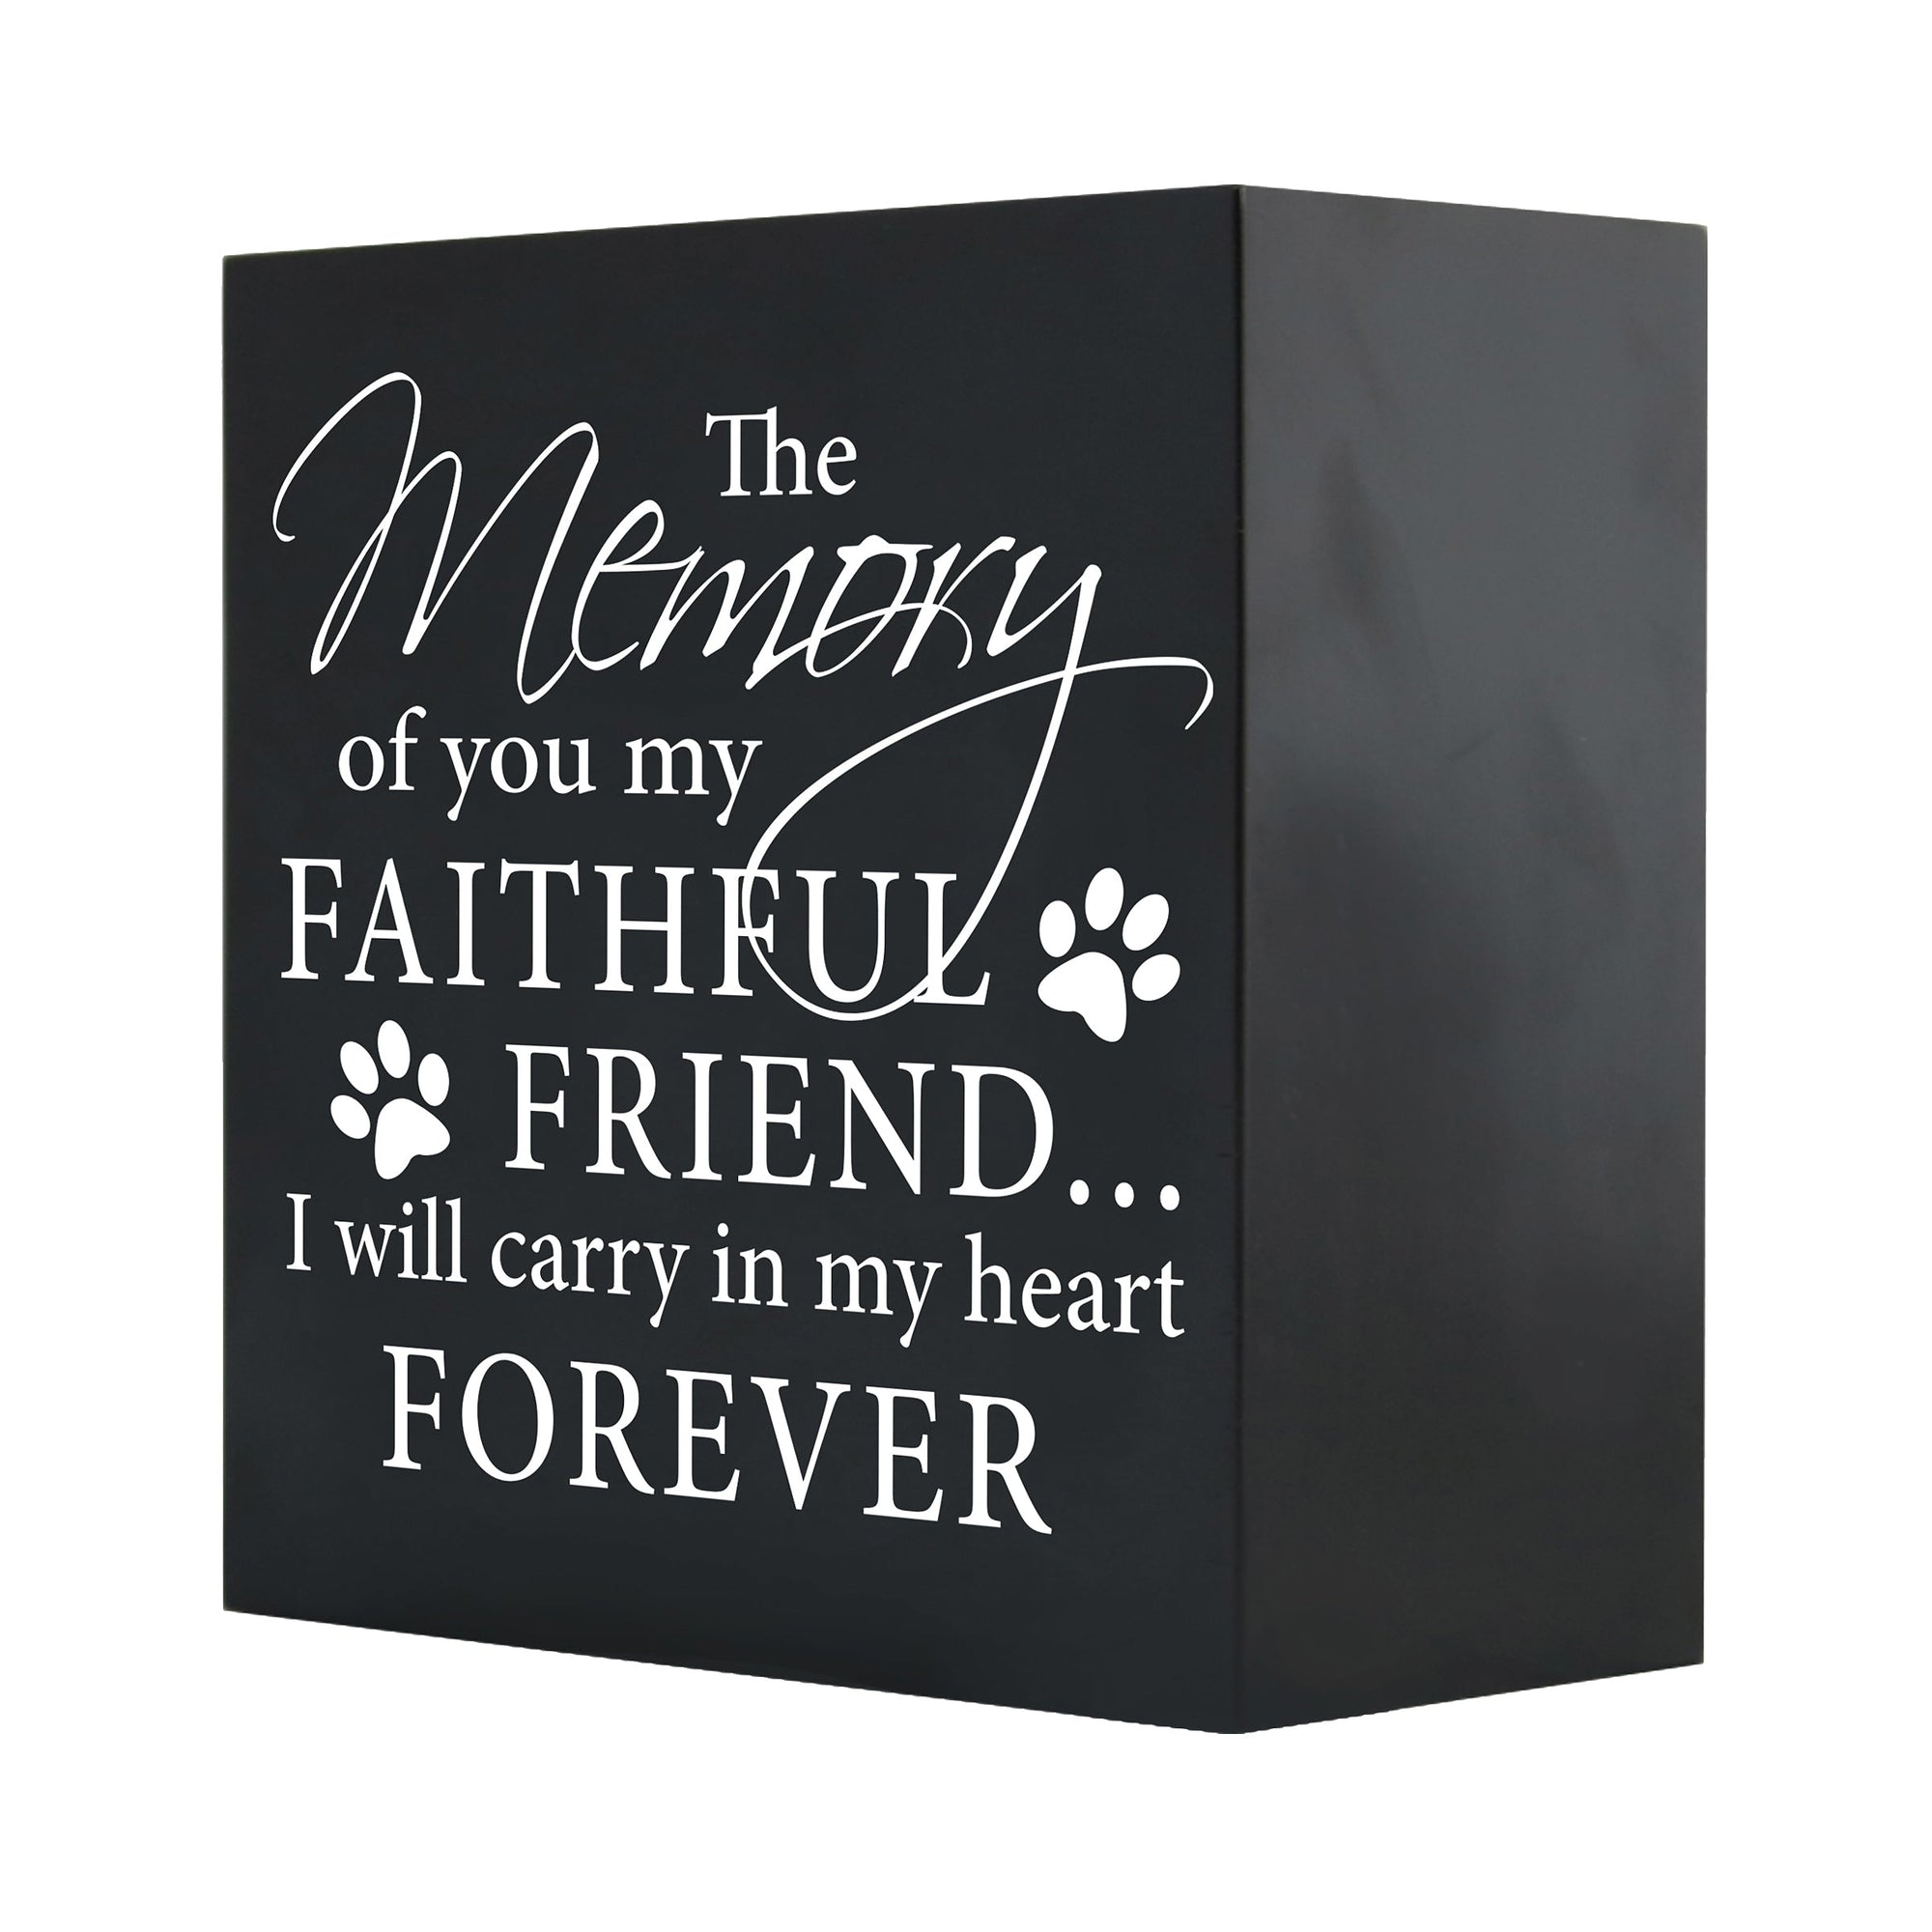 Pet Memorial Shadow Box Cremation Urn for Dog or Cat - The Memory of You